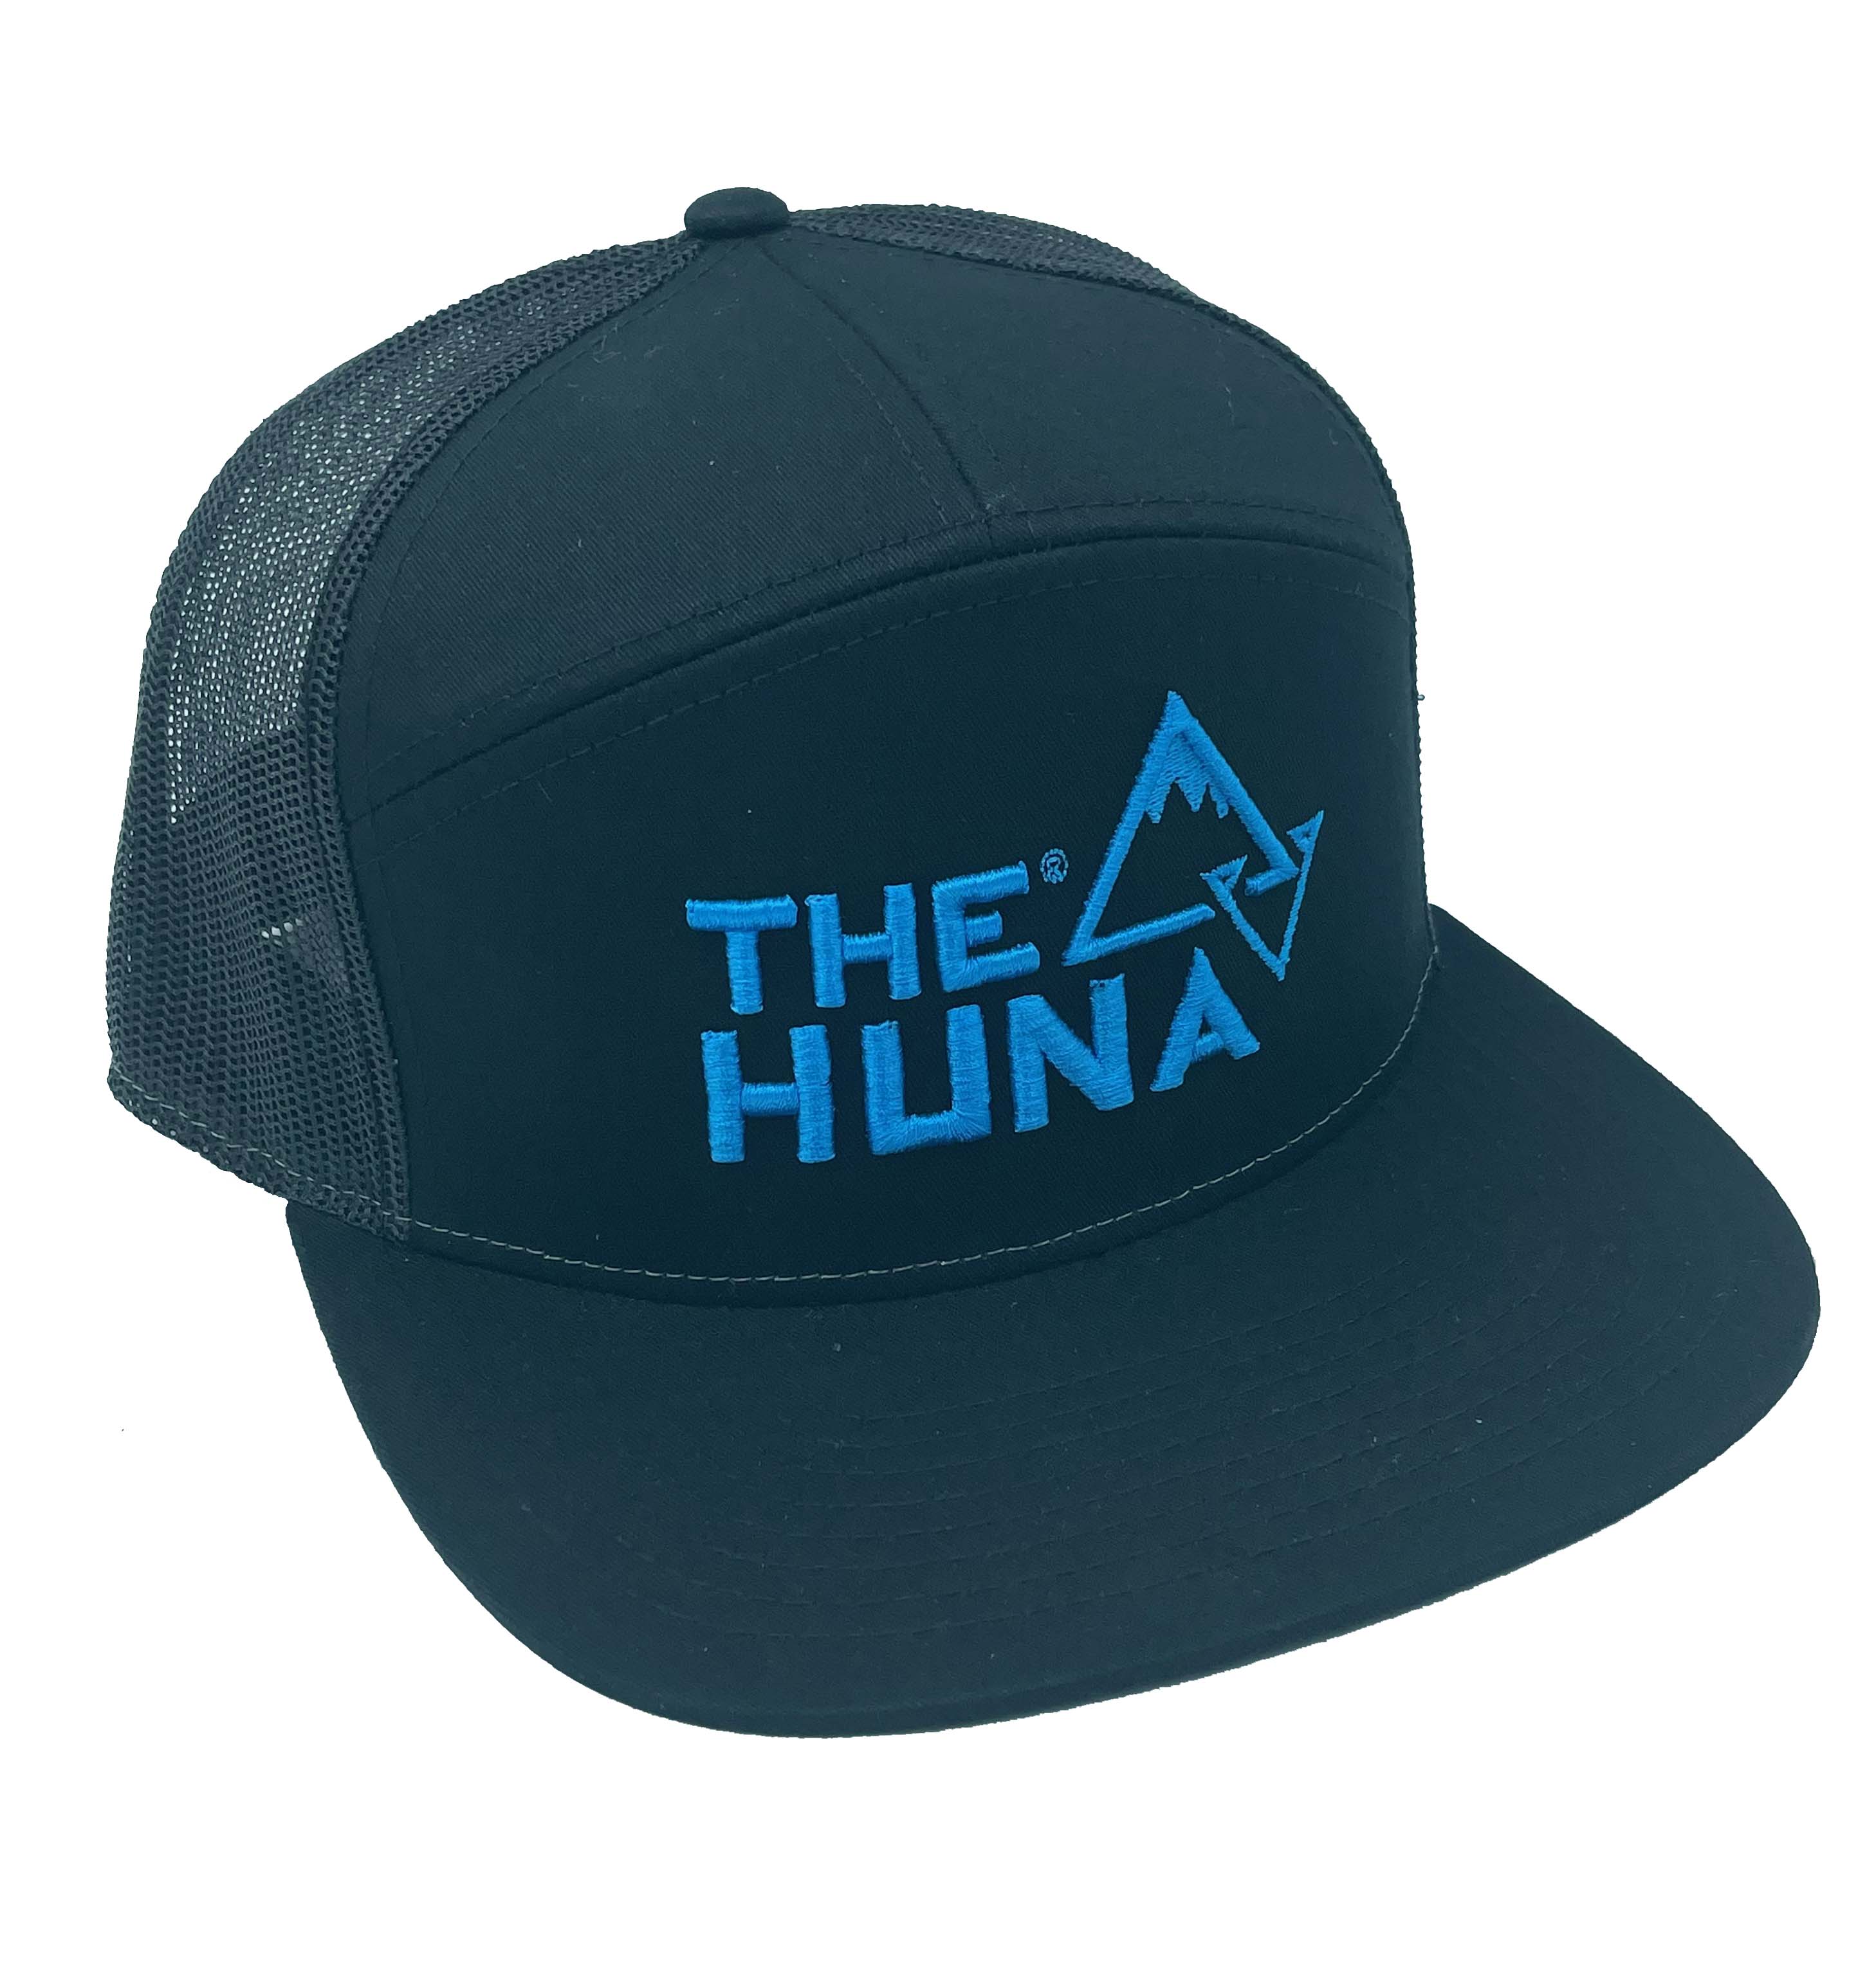 Black w/ Blue Logo - A Cotton Twill, Mesh Backed 7 Panel Hat with a Flat Bill, & Classic Snapback.